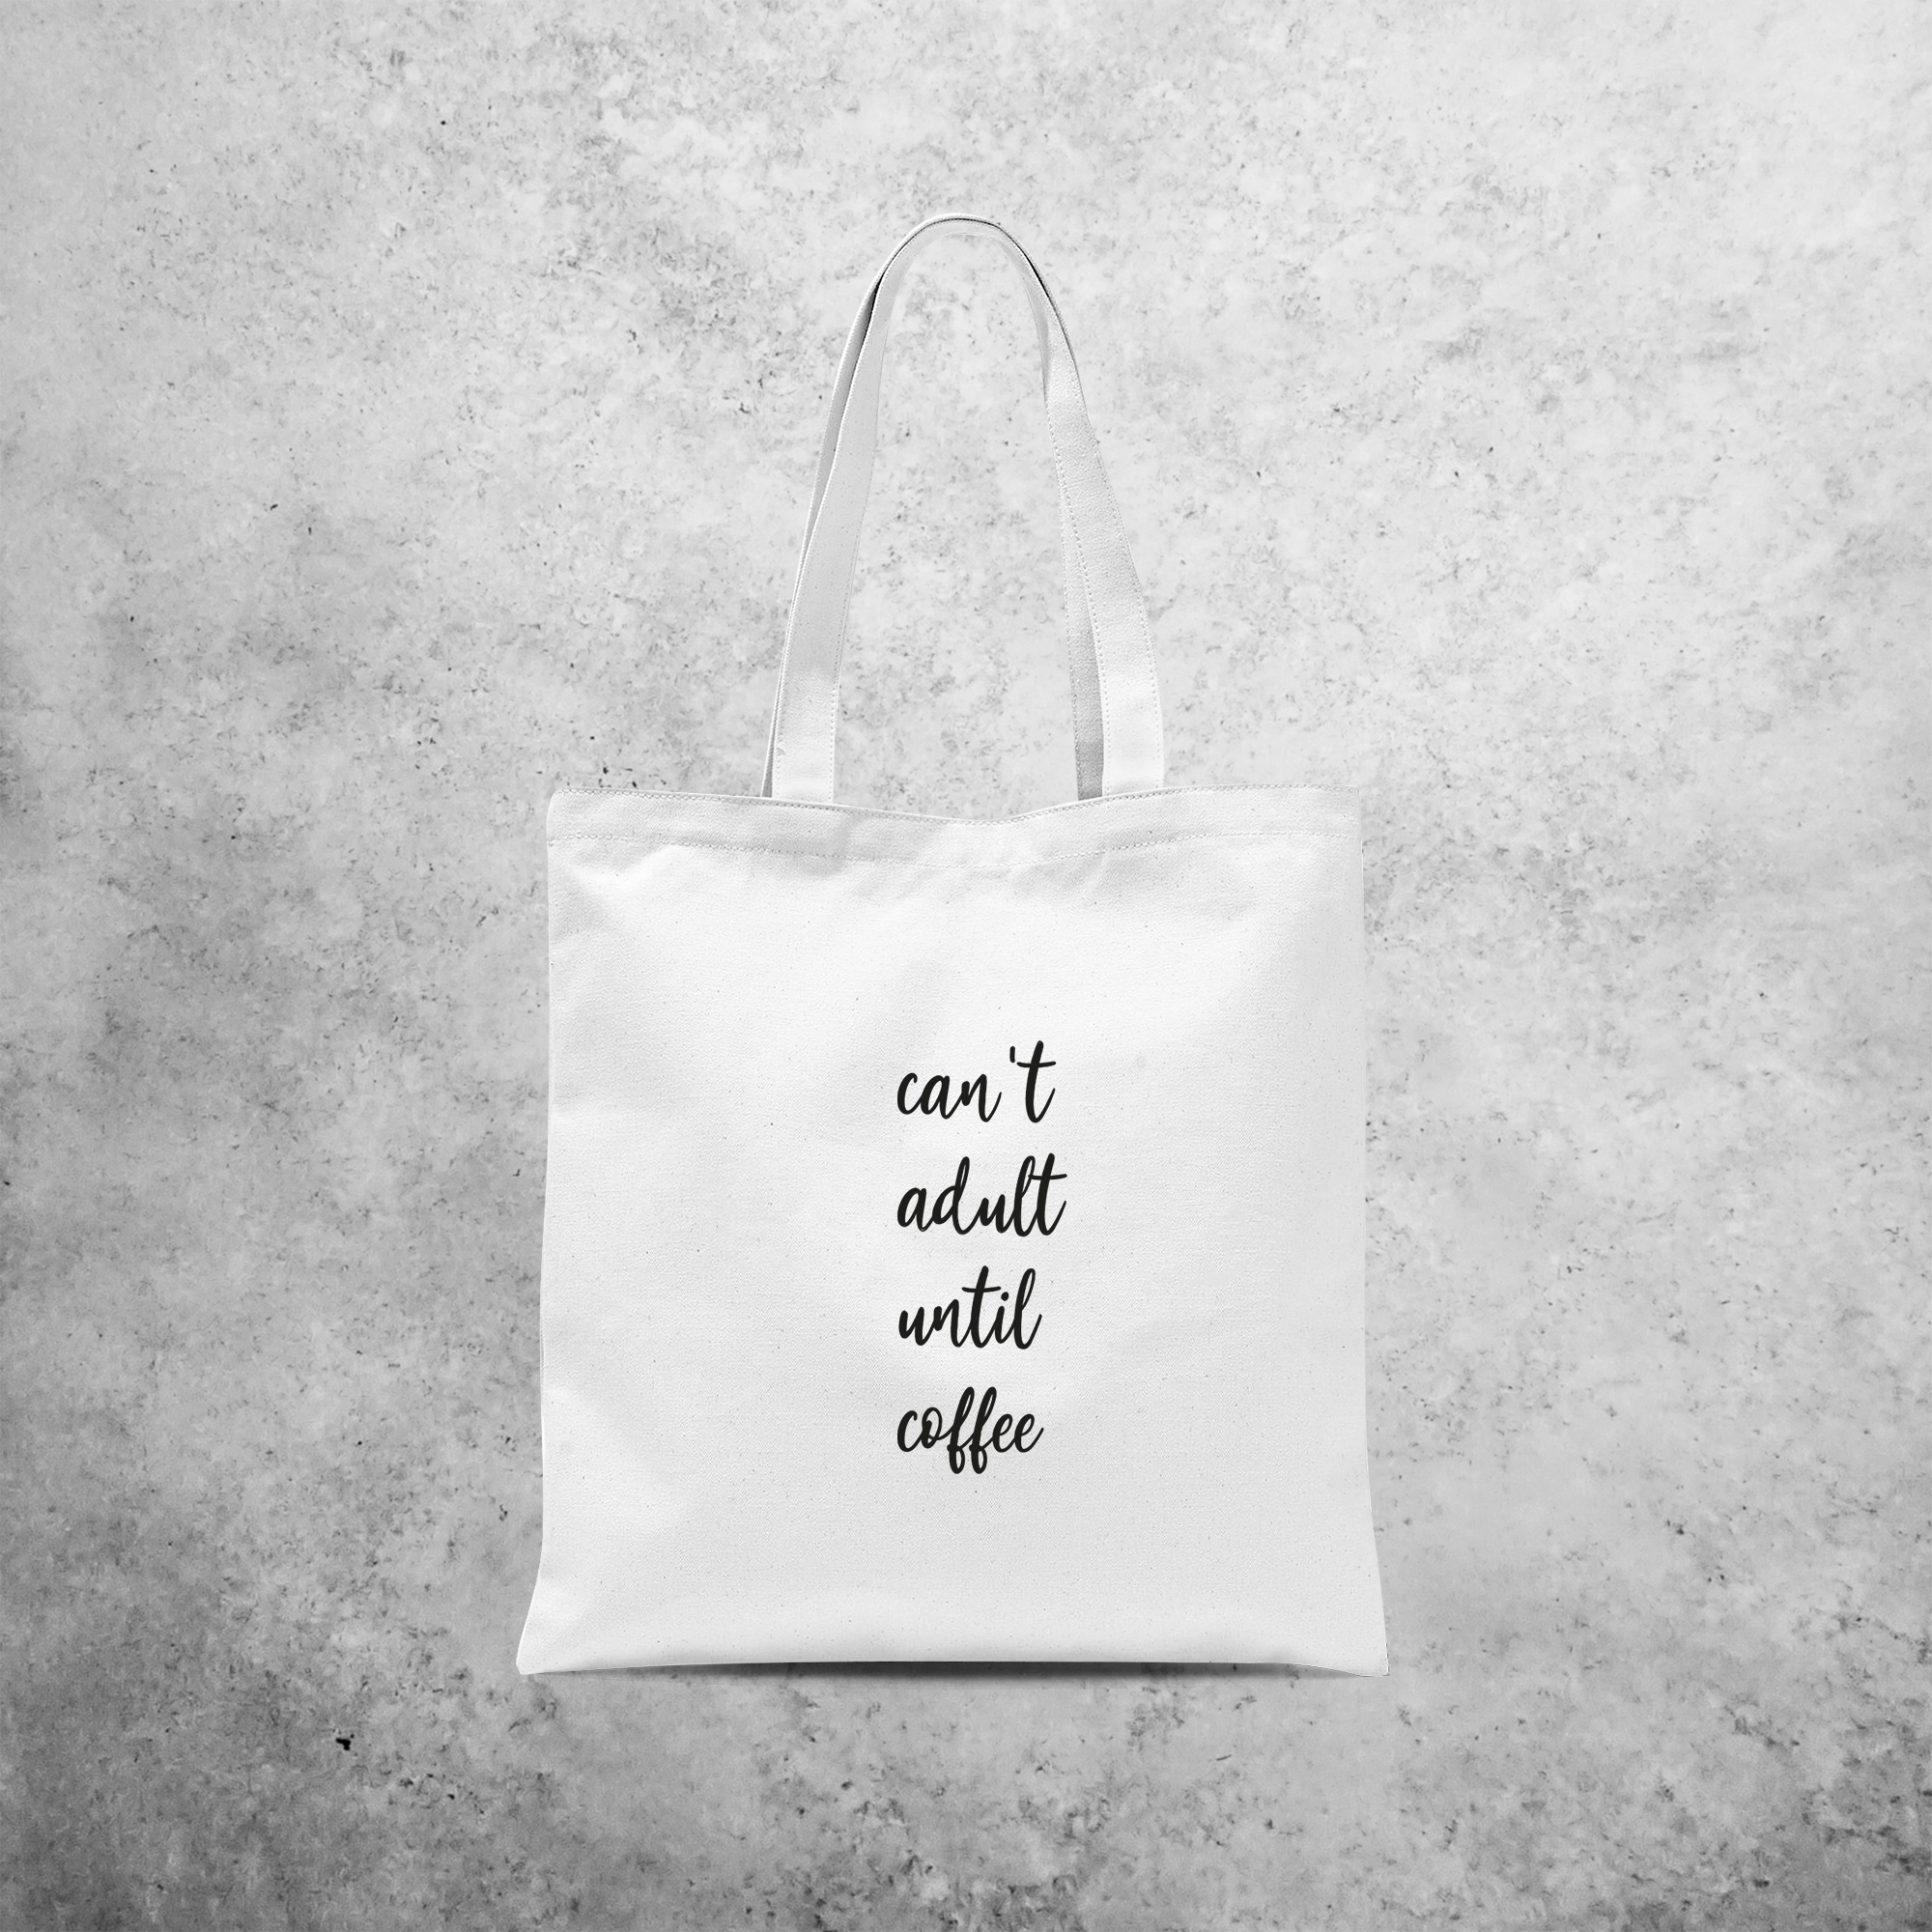 'Can't adult until coffee' tote bag